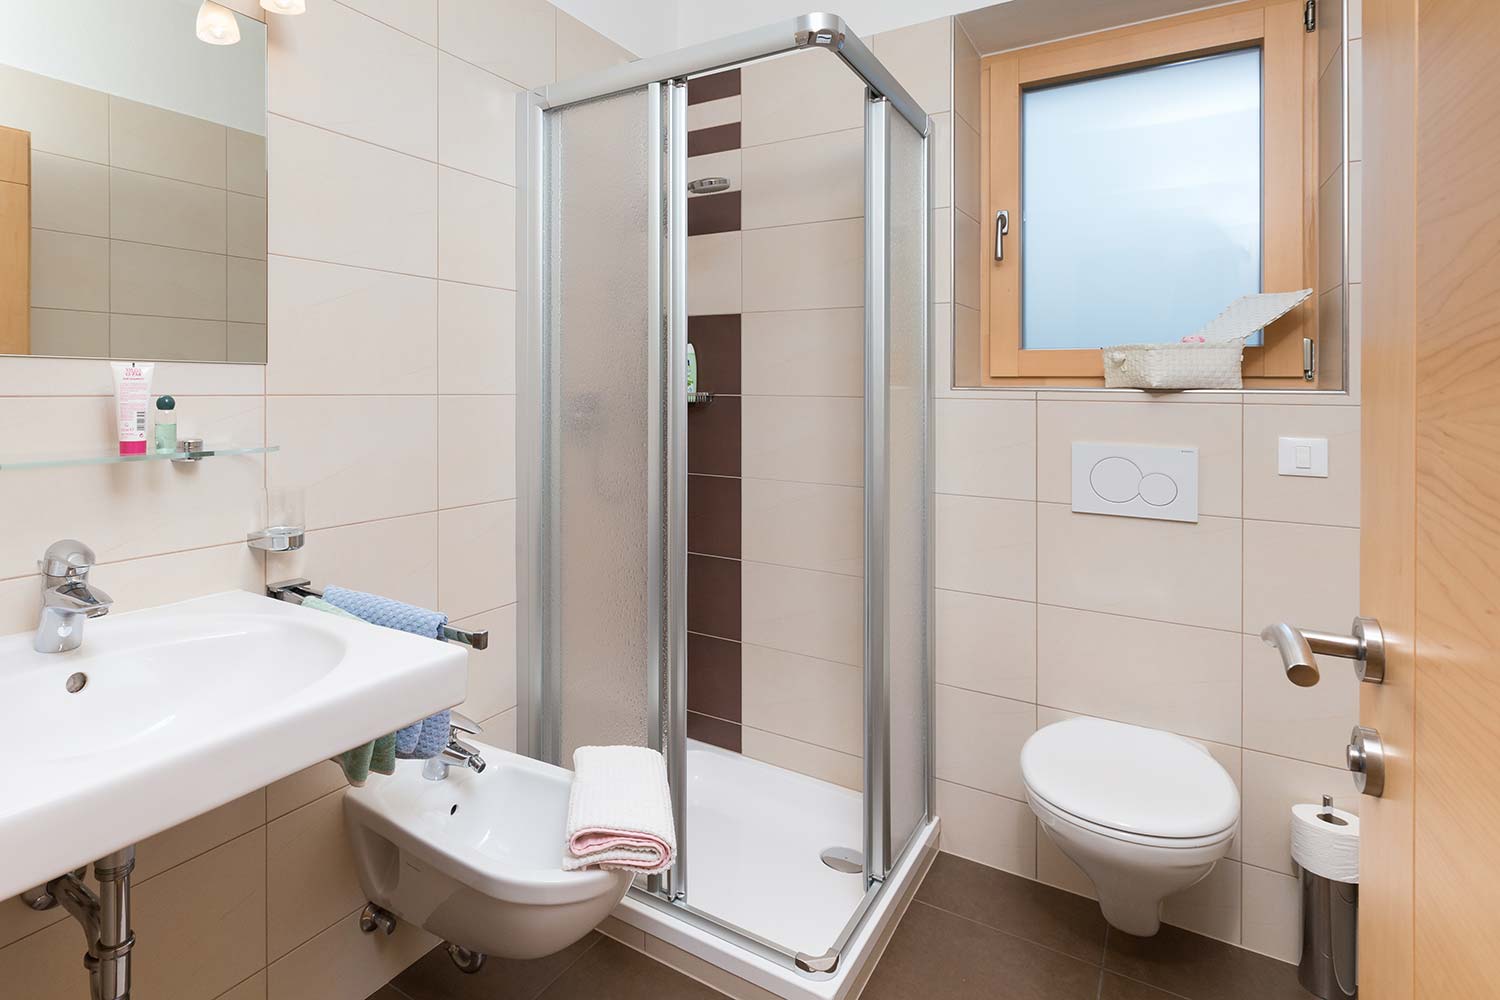 Bathroom with shower, WC and hair drier